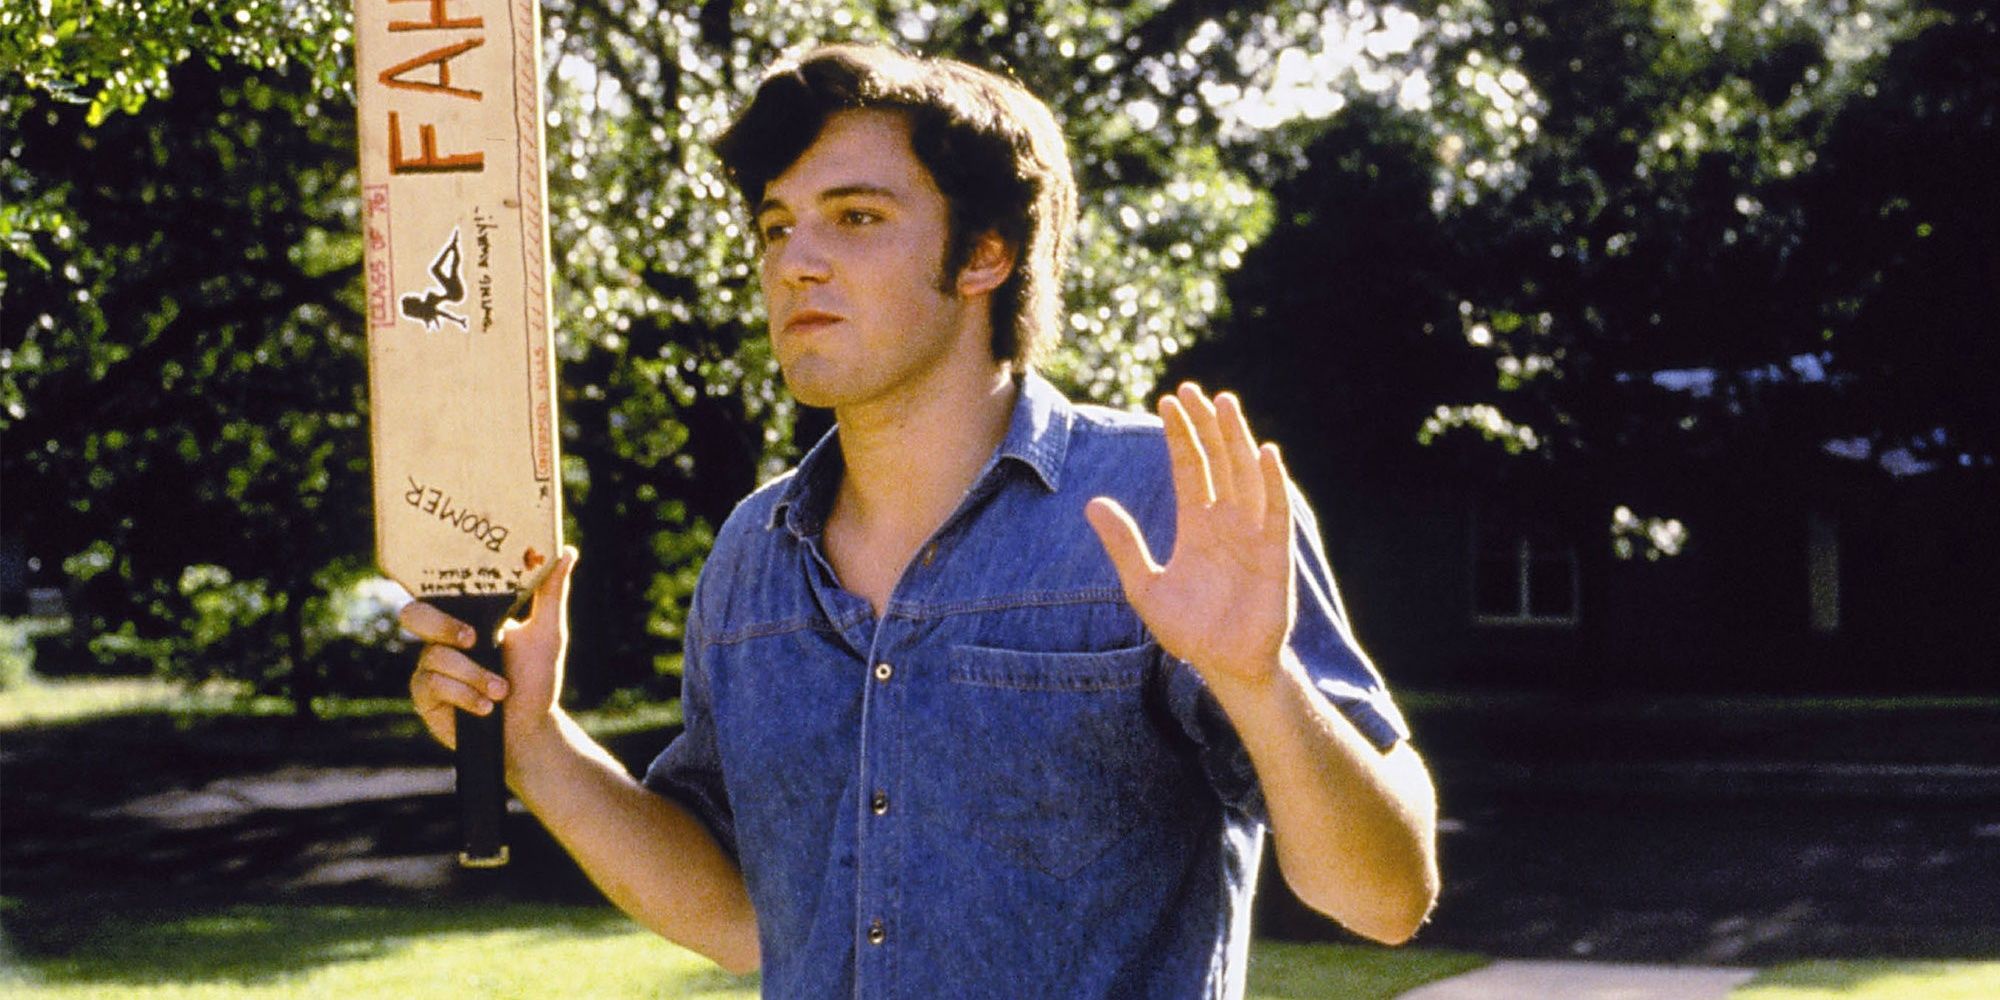 Ben Affleck raising his hands in innocence in Dazed and Confused